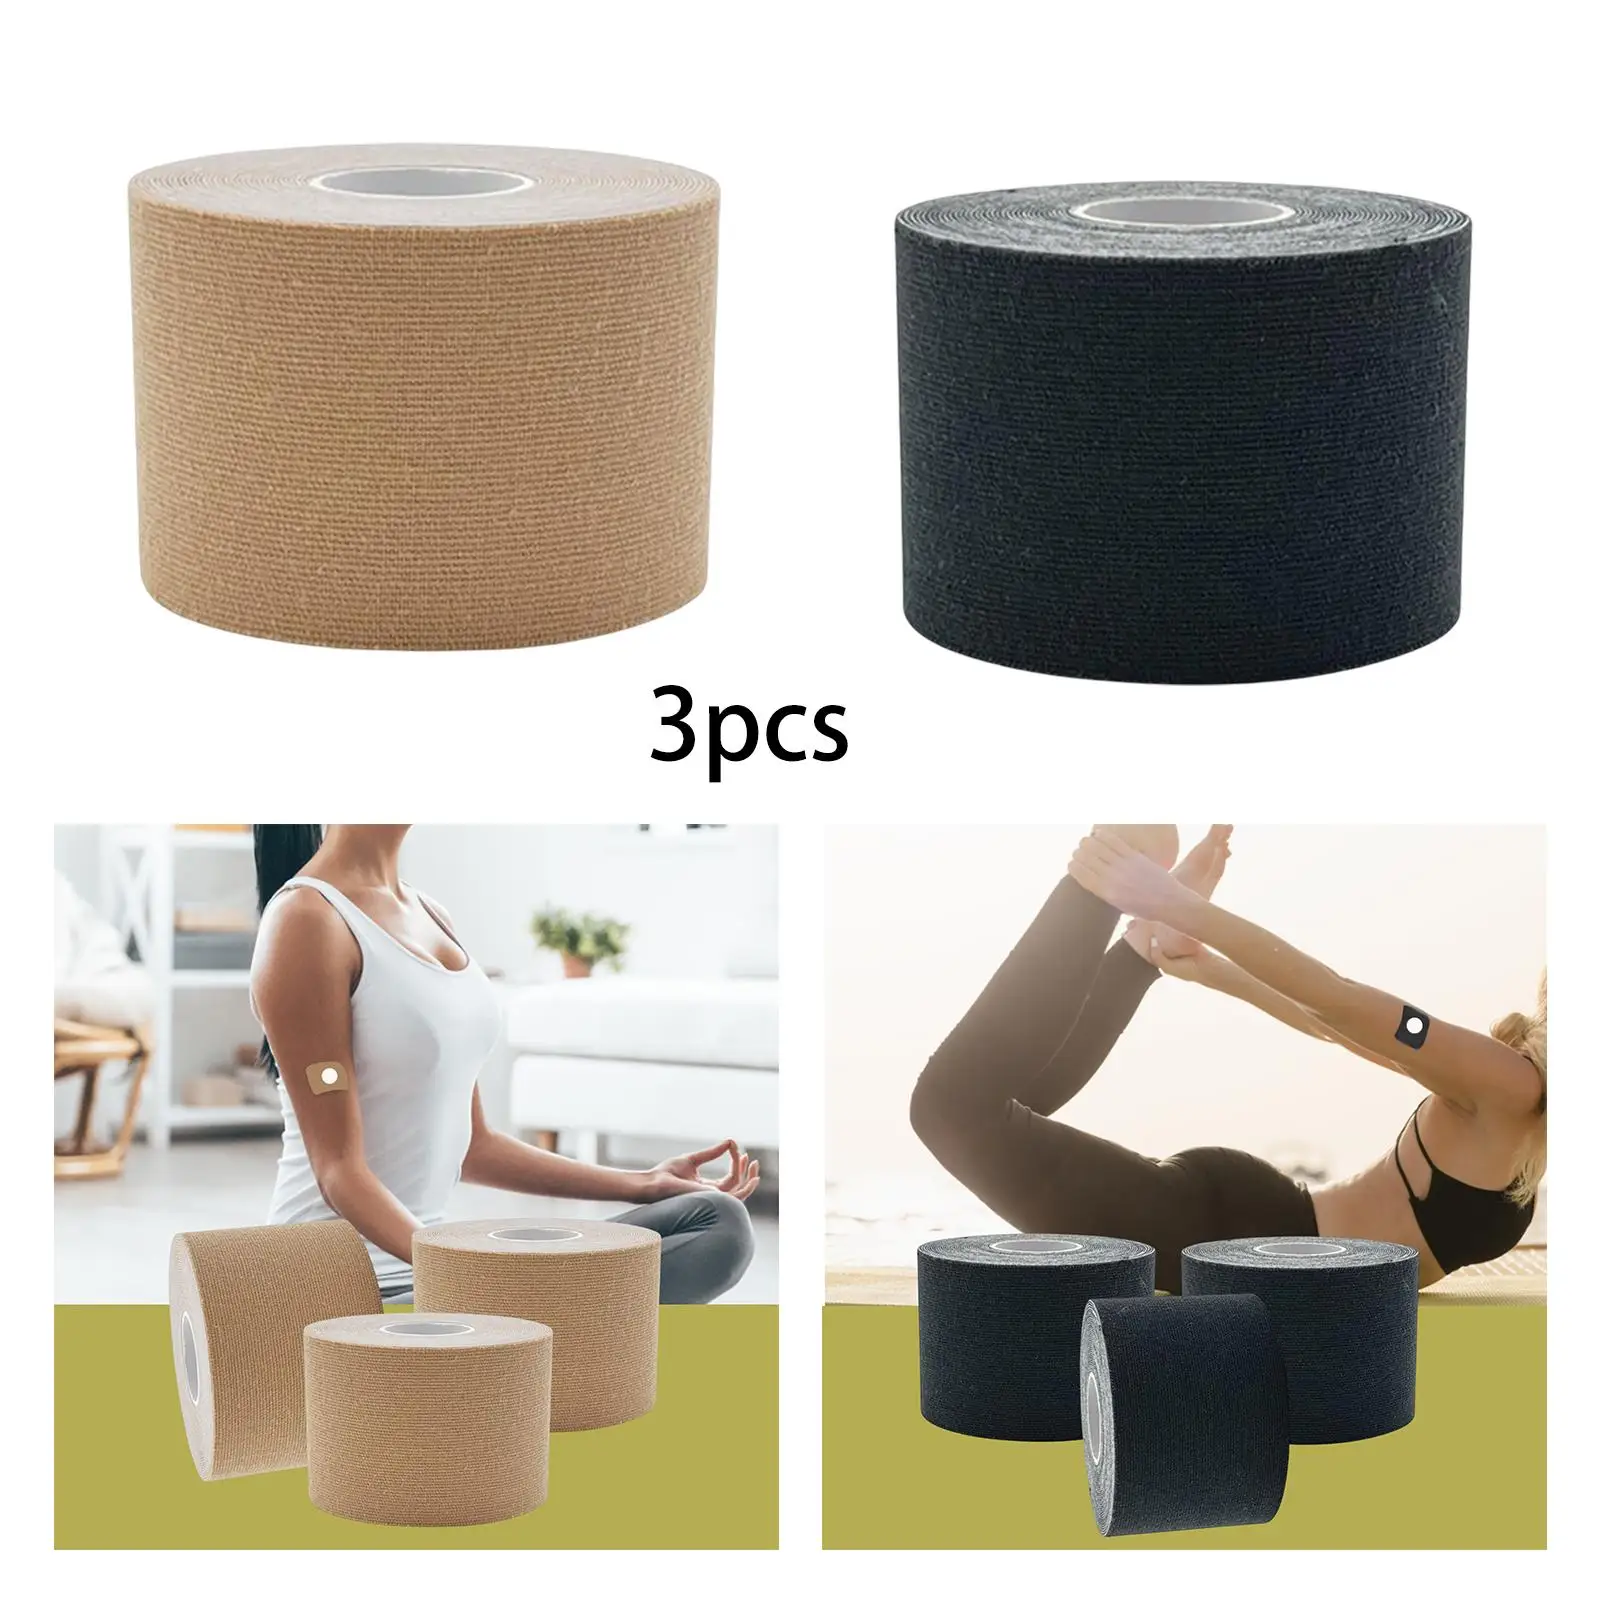 3 Pieces 5M Tape for Sports Breathable with Buttons for Chest Gym Football